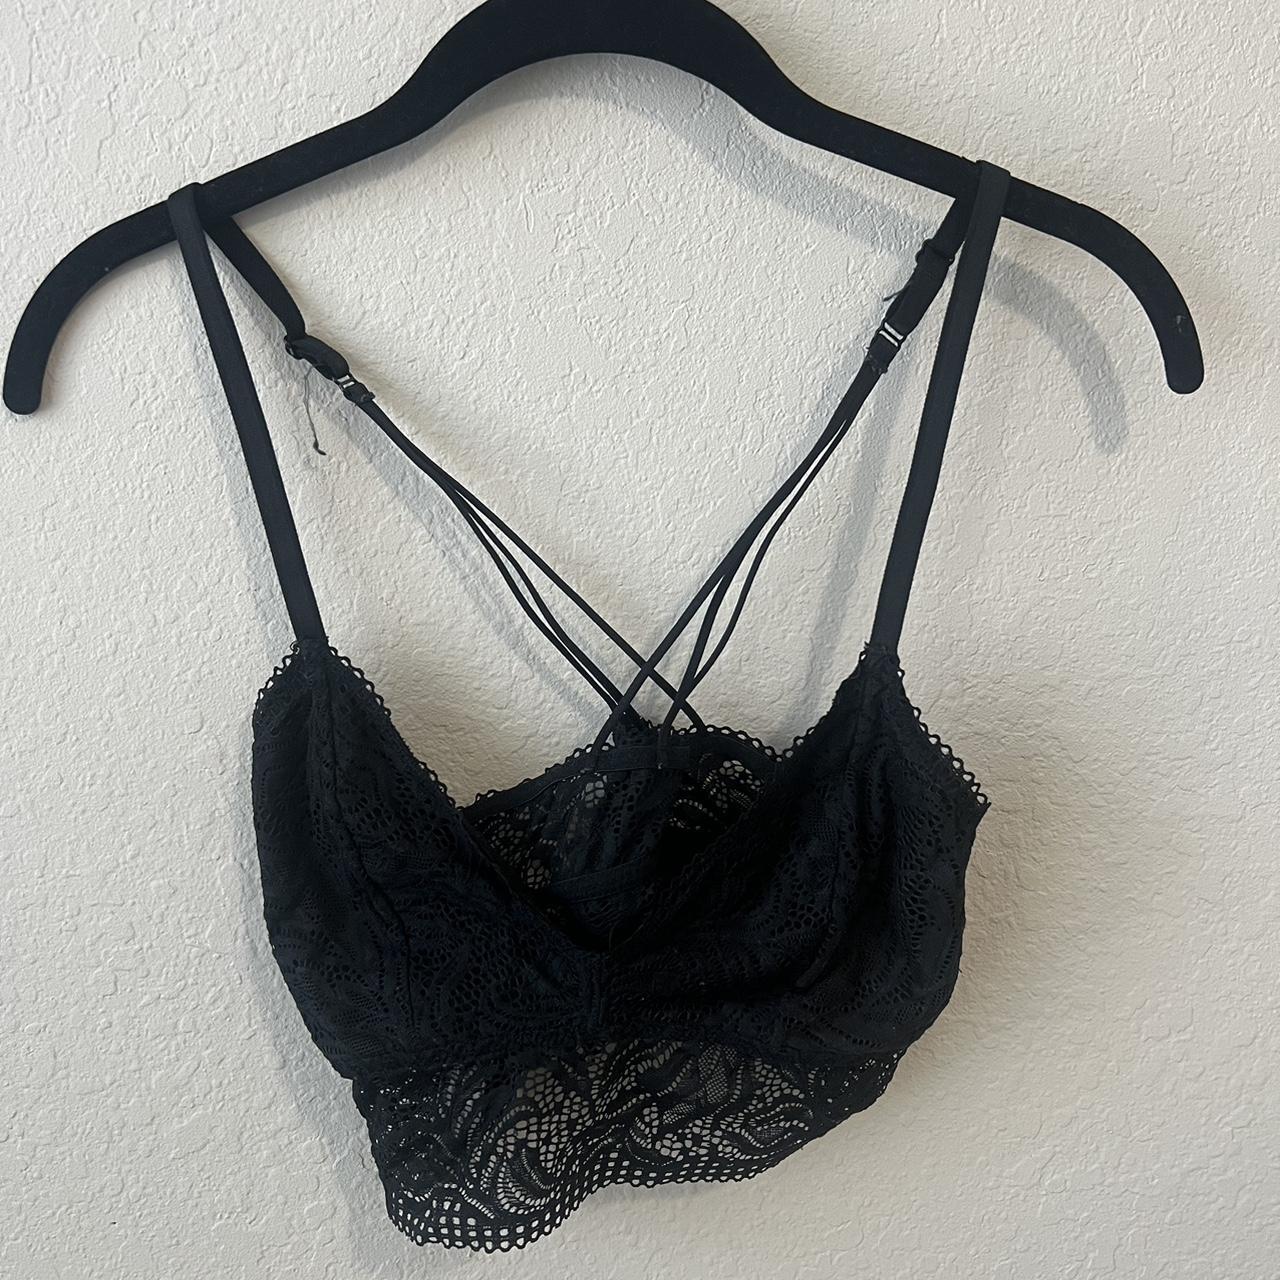 Women's Strappy Lace Bralette - Auden Gray and similar items